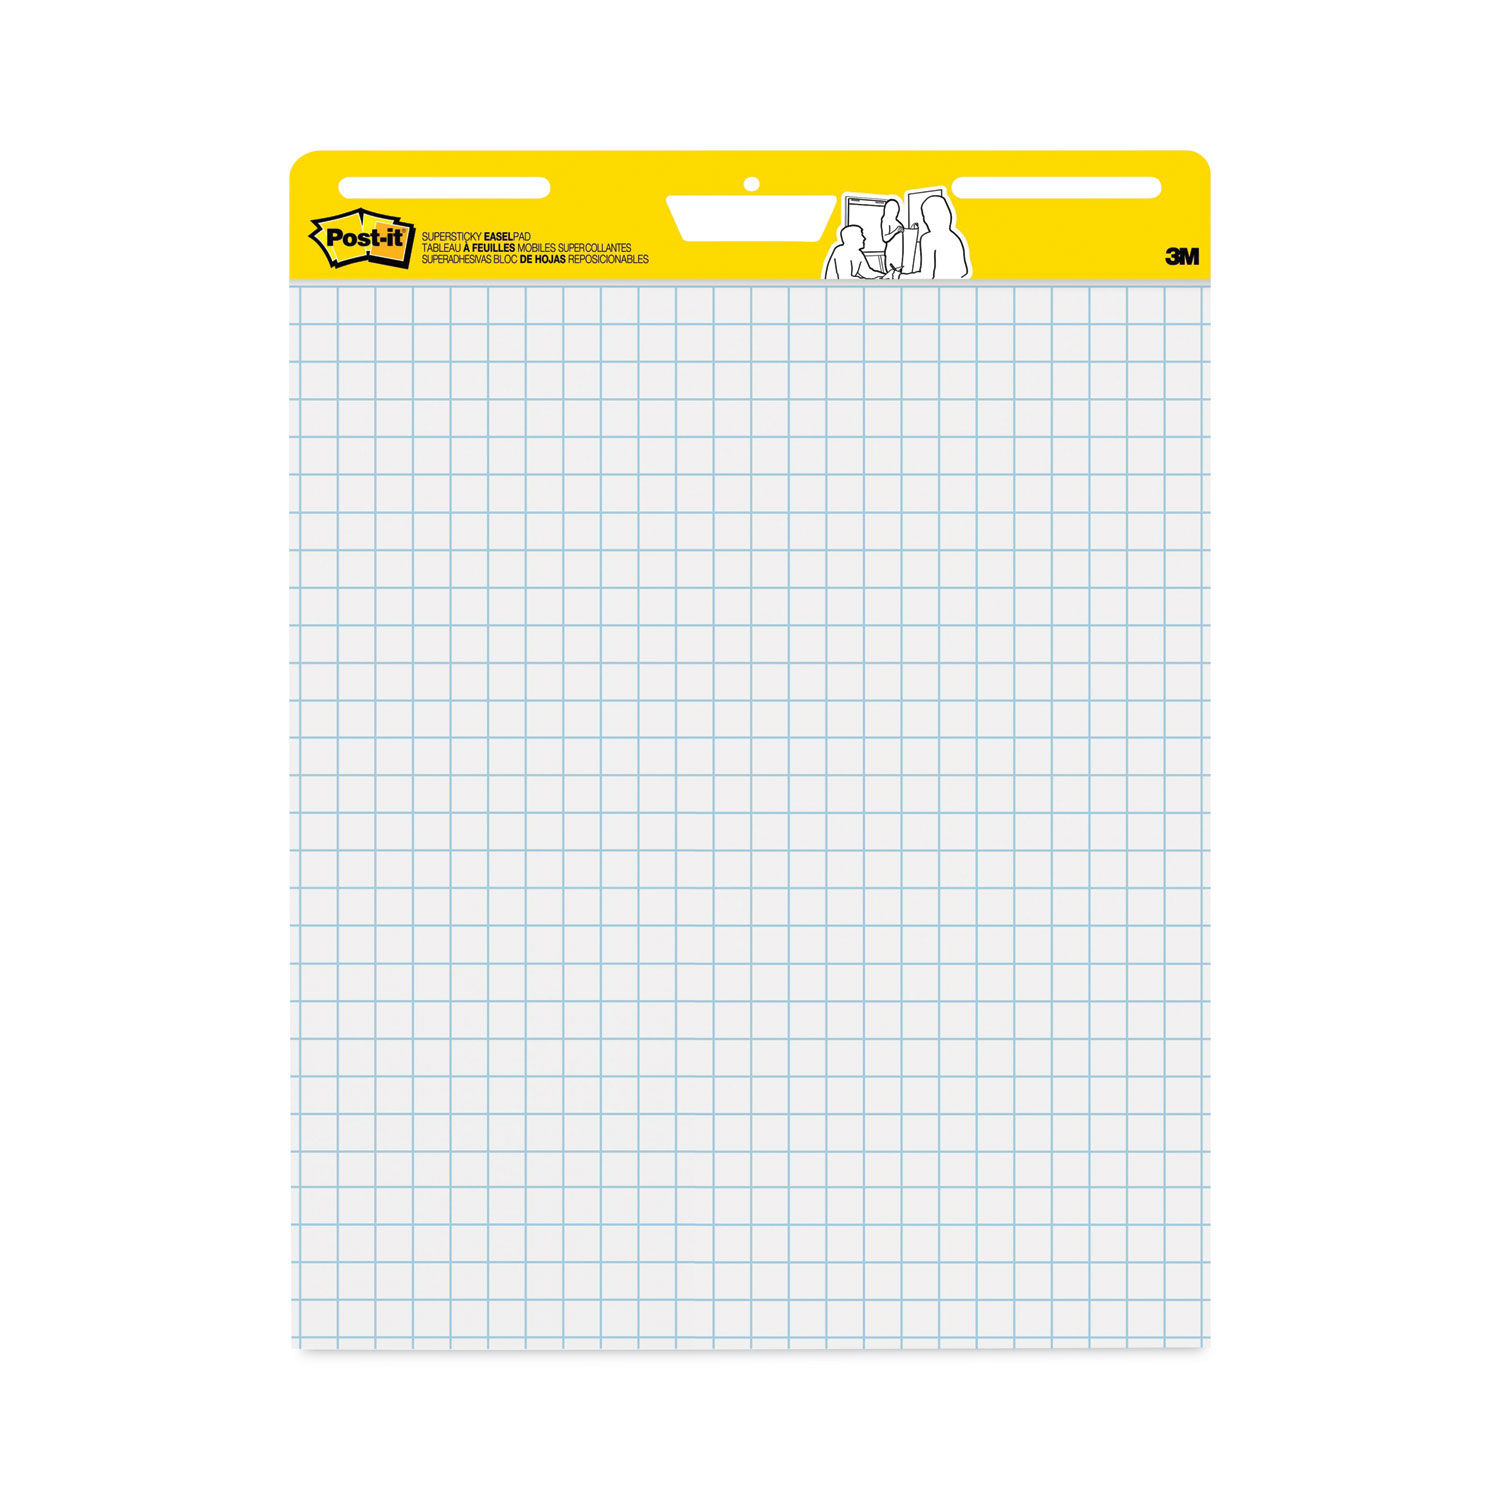 Vertical-Orientation Self-Stick Easel Pad Value Pack by Post-it® Easel Pads  Super Sticky MMM560VAD4PK